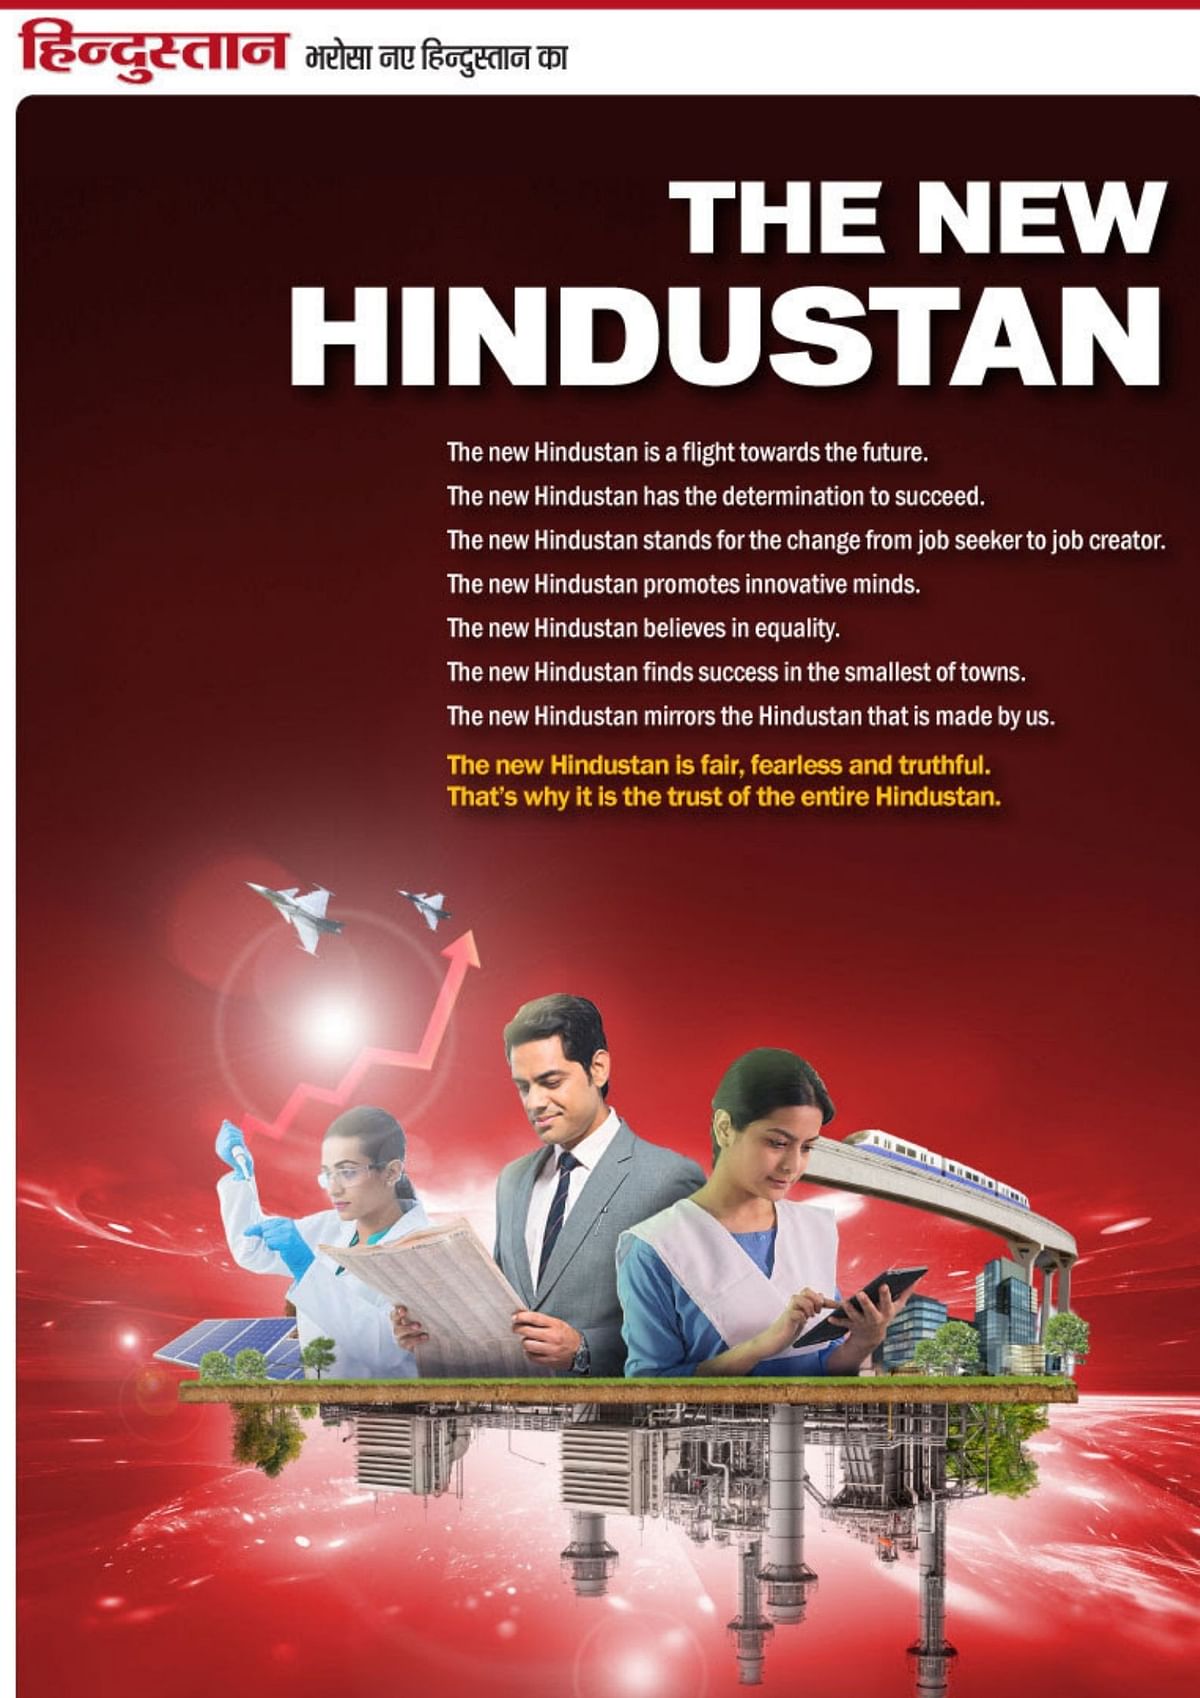 HT Media brings out an all-new ‘Hindustan’ 